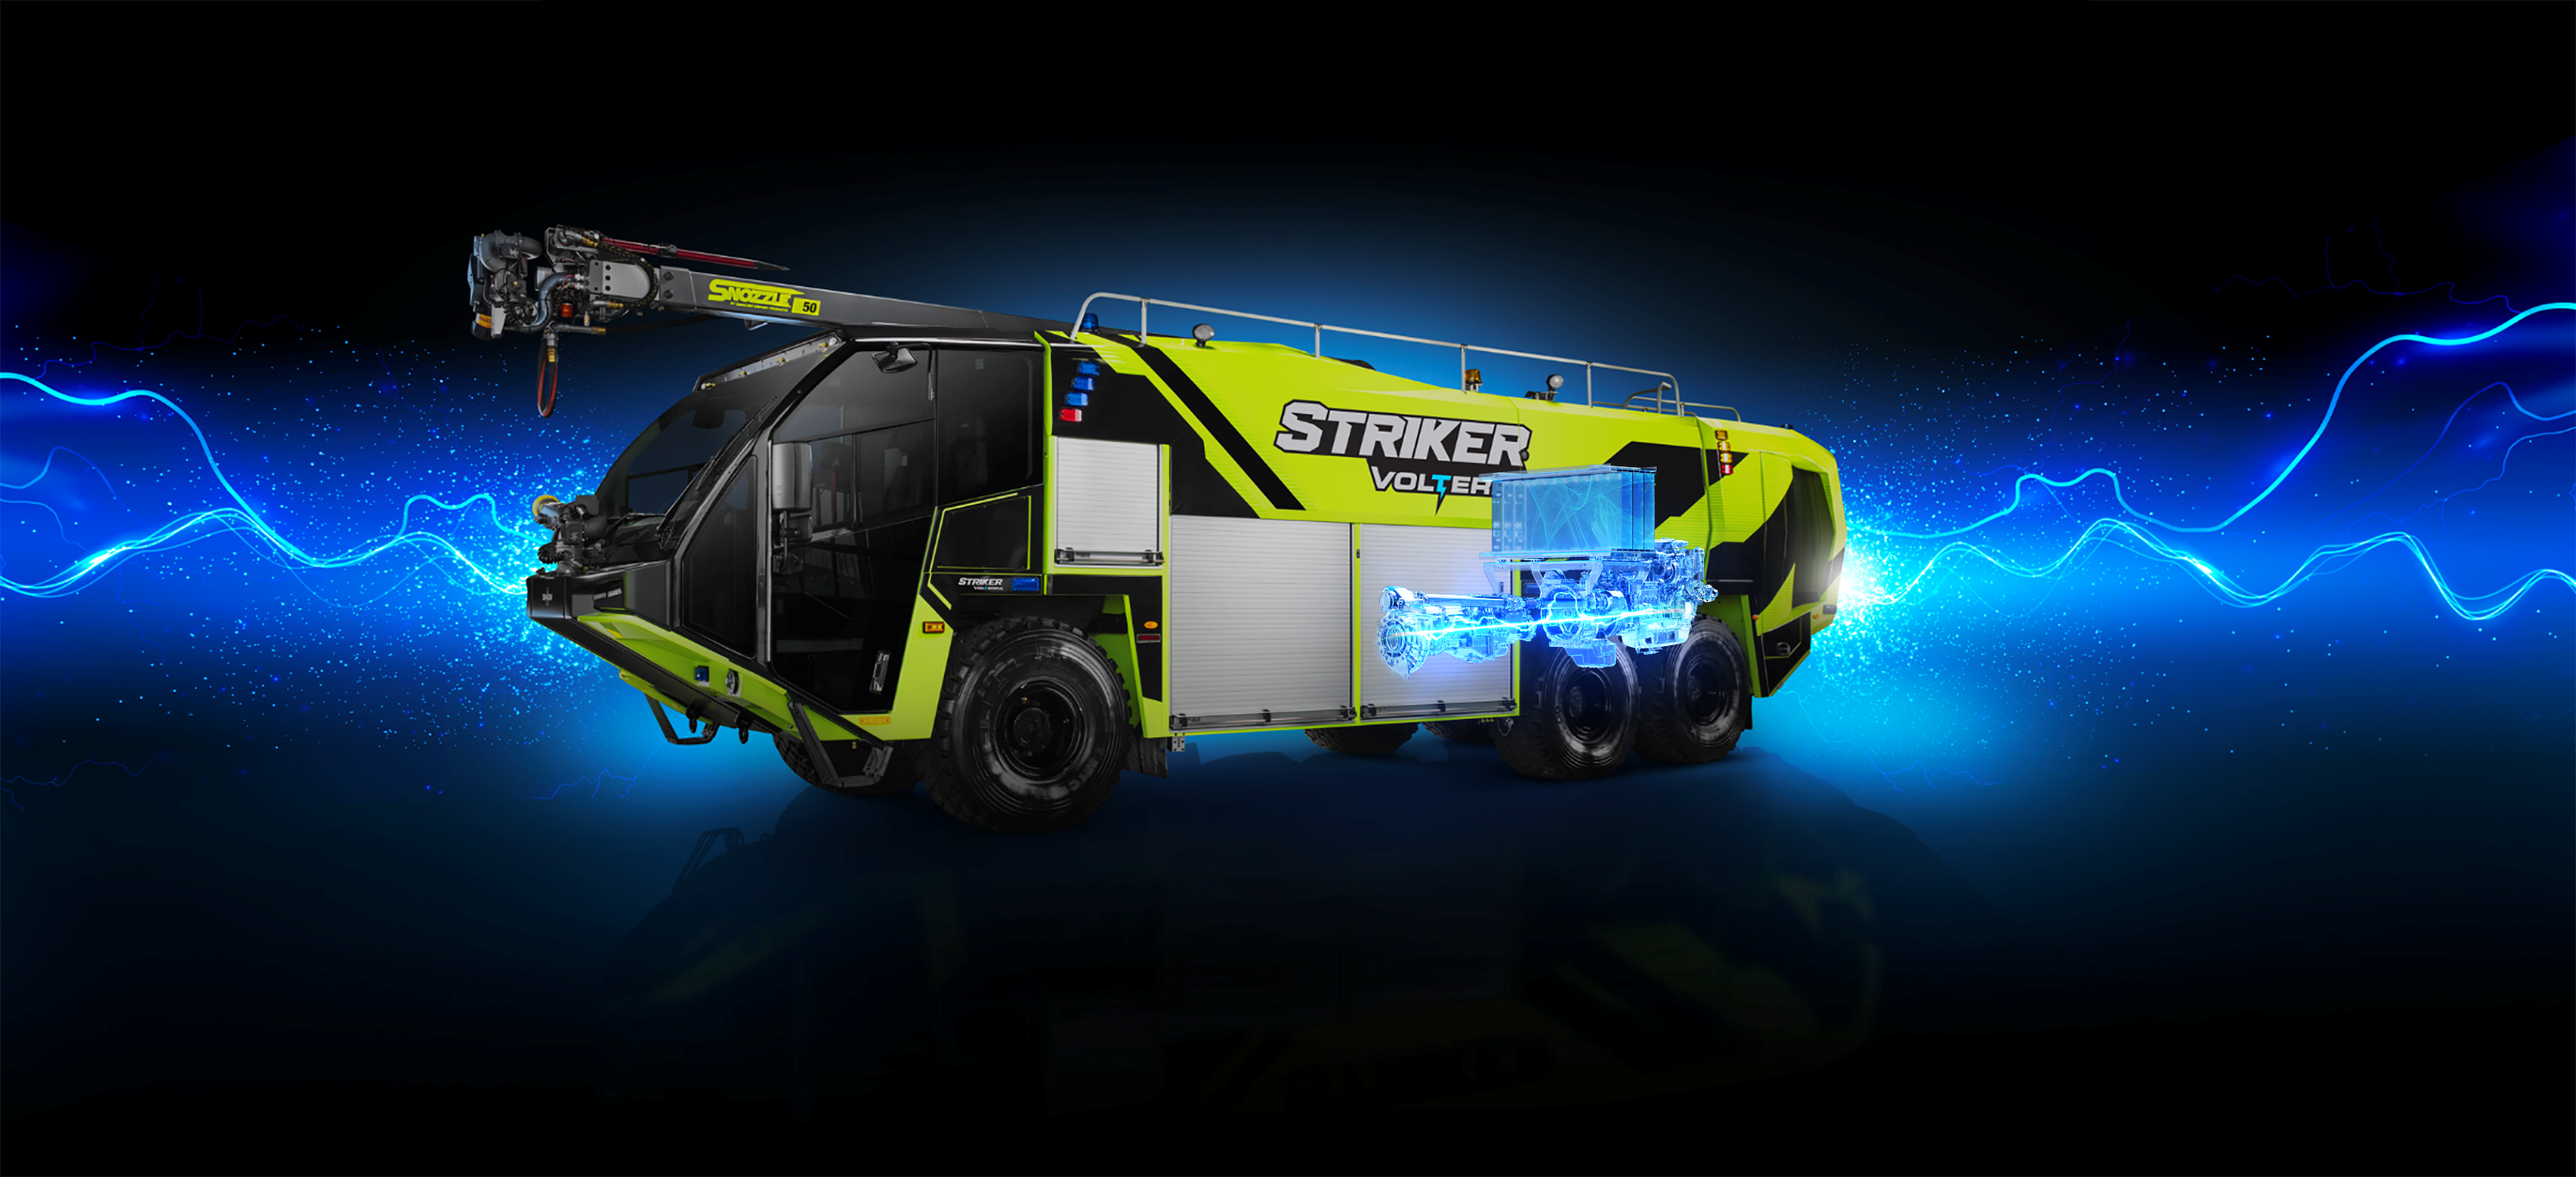 Side view of the Striker Volterra on black background with blue lightning streaks